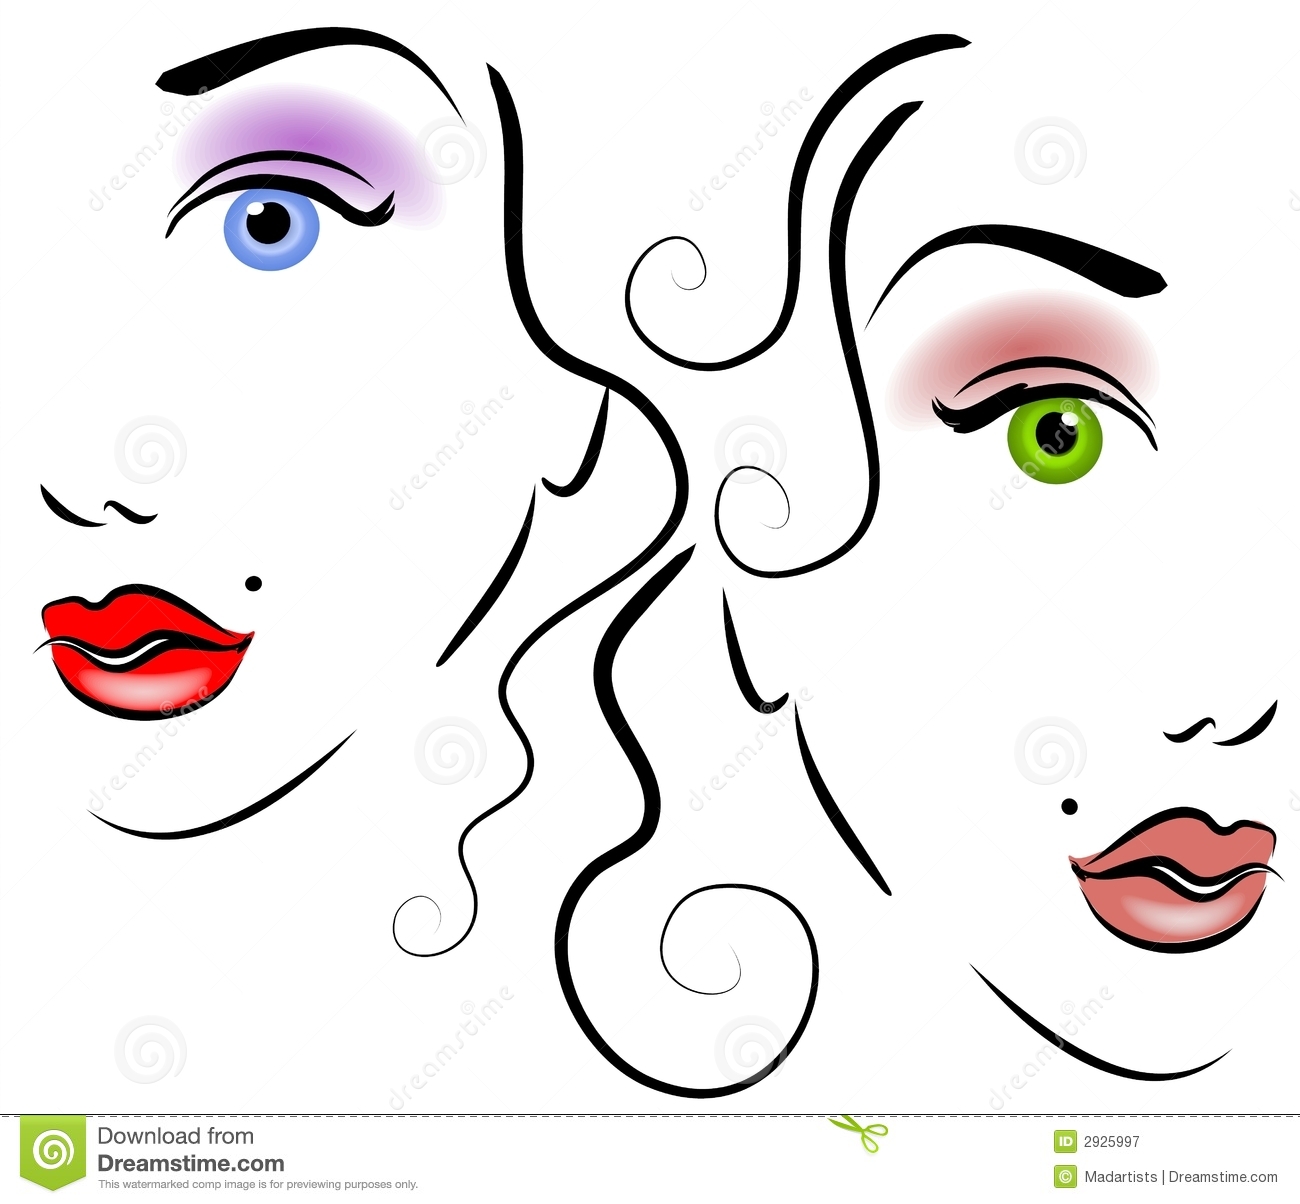 Faces Of Women Clip Art 2 Royalty Free Stock Photography   Image